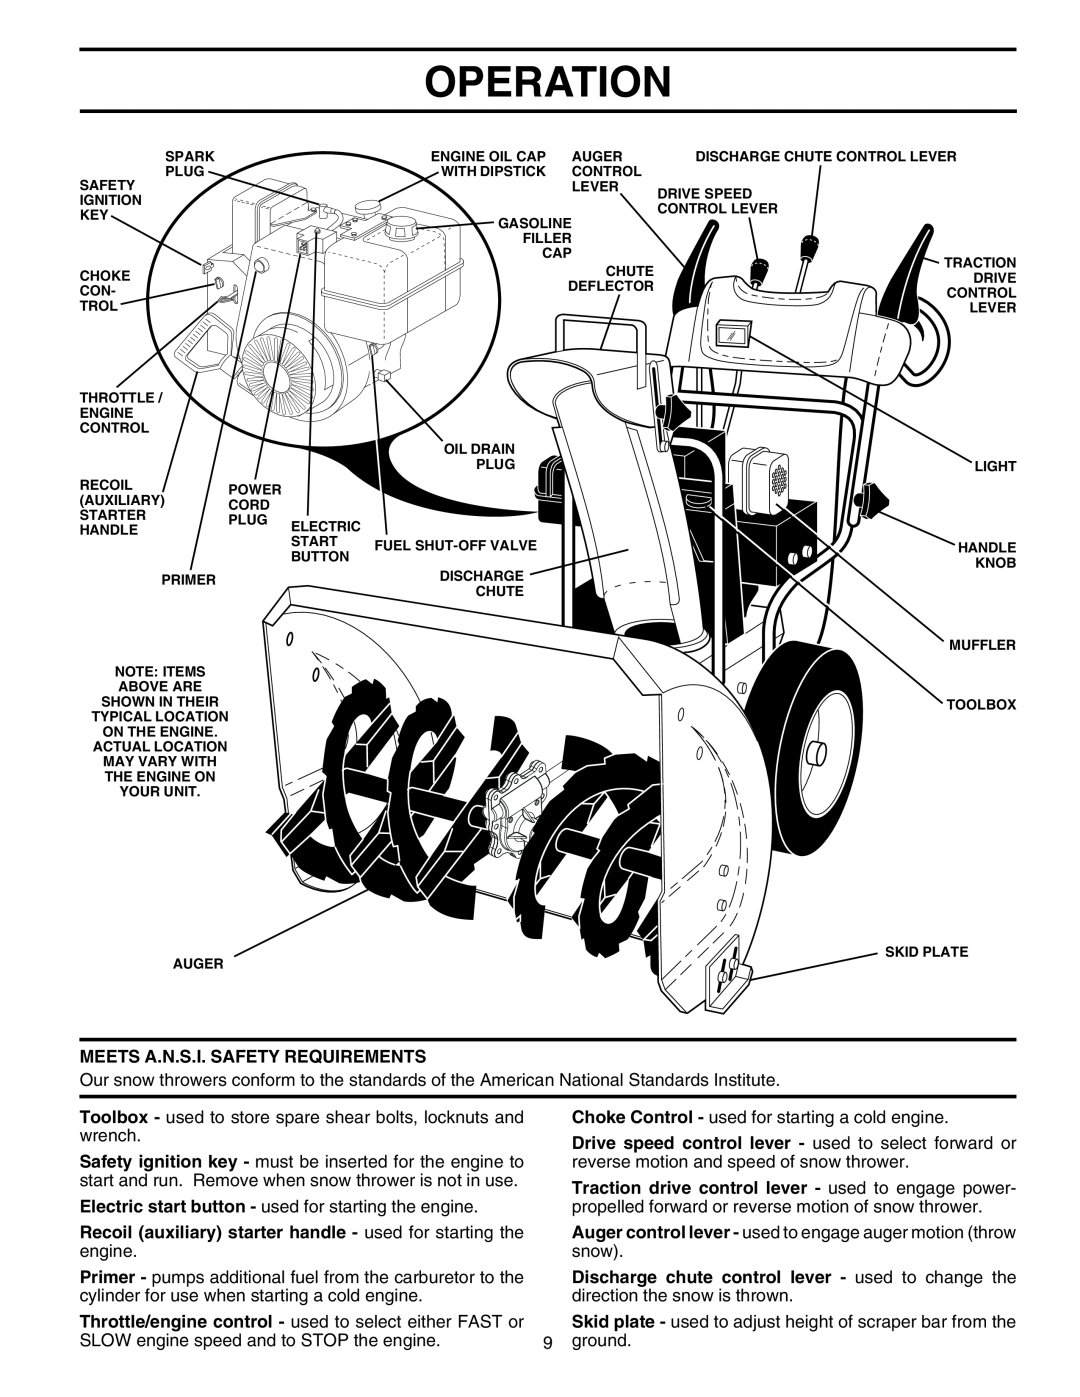 Husqvarna 8024ST owner manual Operation, Meets A.N.S.I. Safety Requirements 